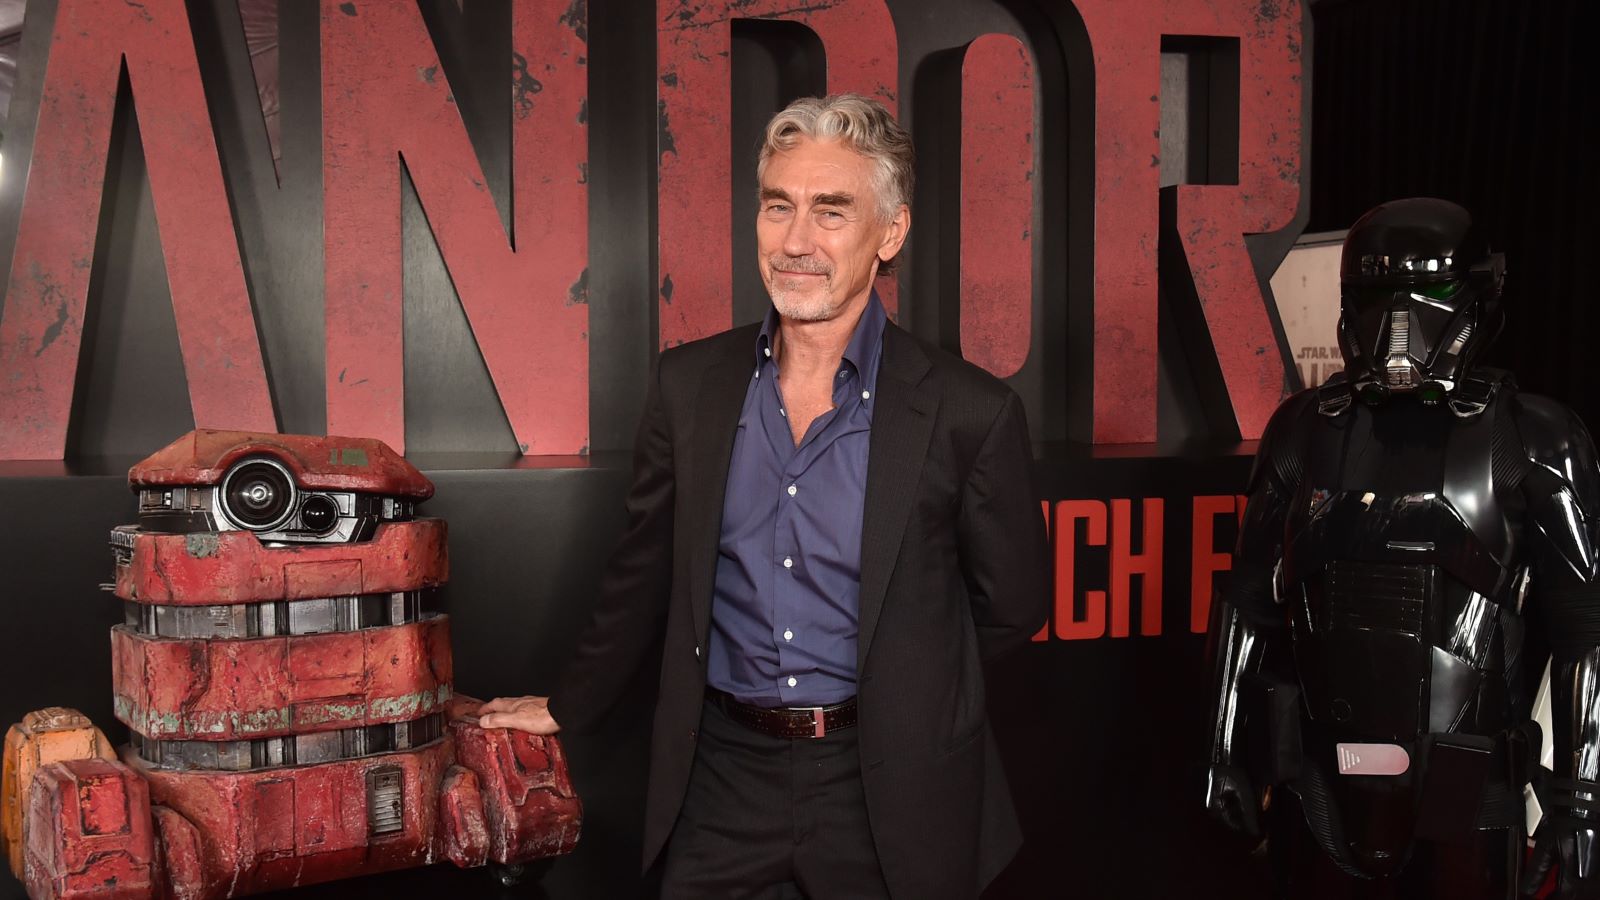 Tony Gilroy arrives at the special 3-episode launch event for Lucasfilm's original series Andor at the El Capitan Theatre in Hollywood, California on September 15, 2022. (Photo by Alberto E. Rodriguez/Getty Images for Disney)